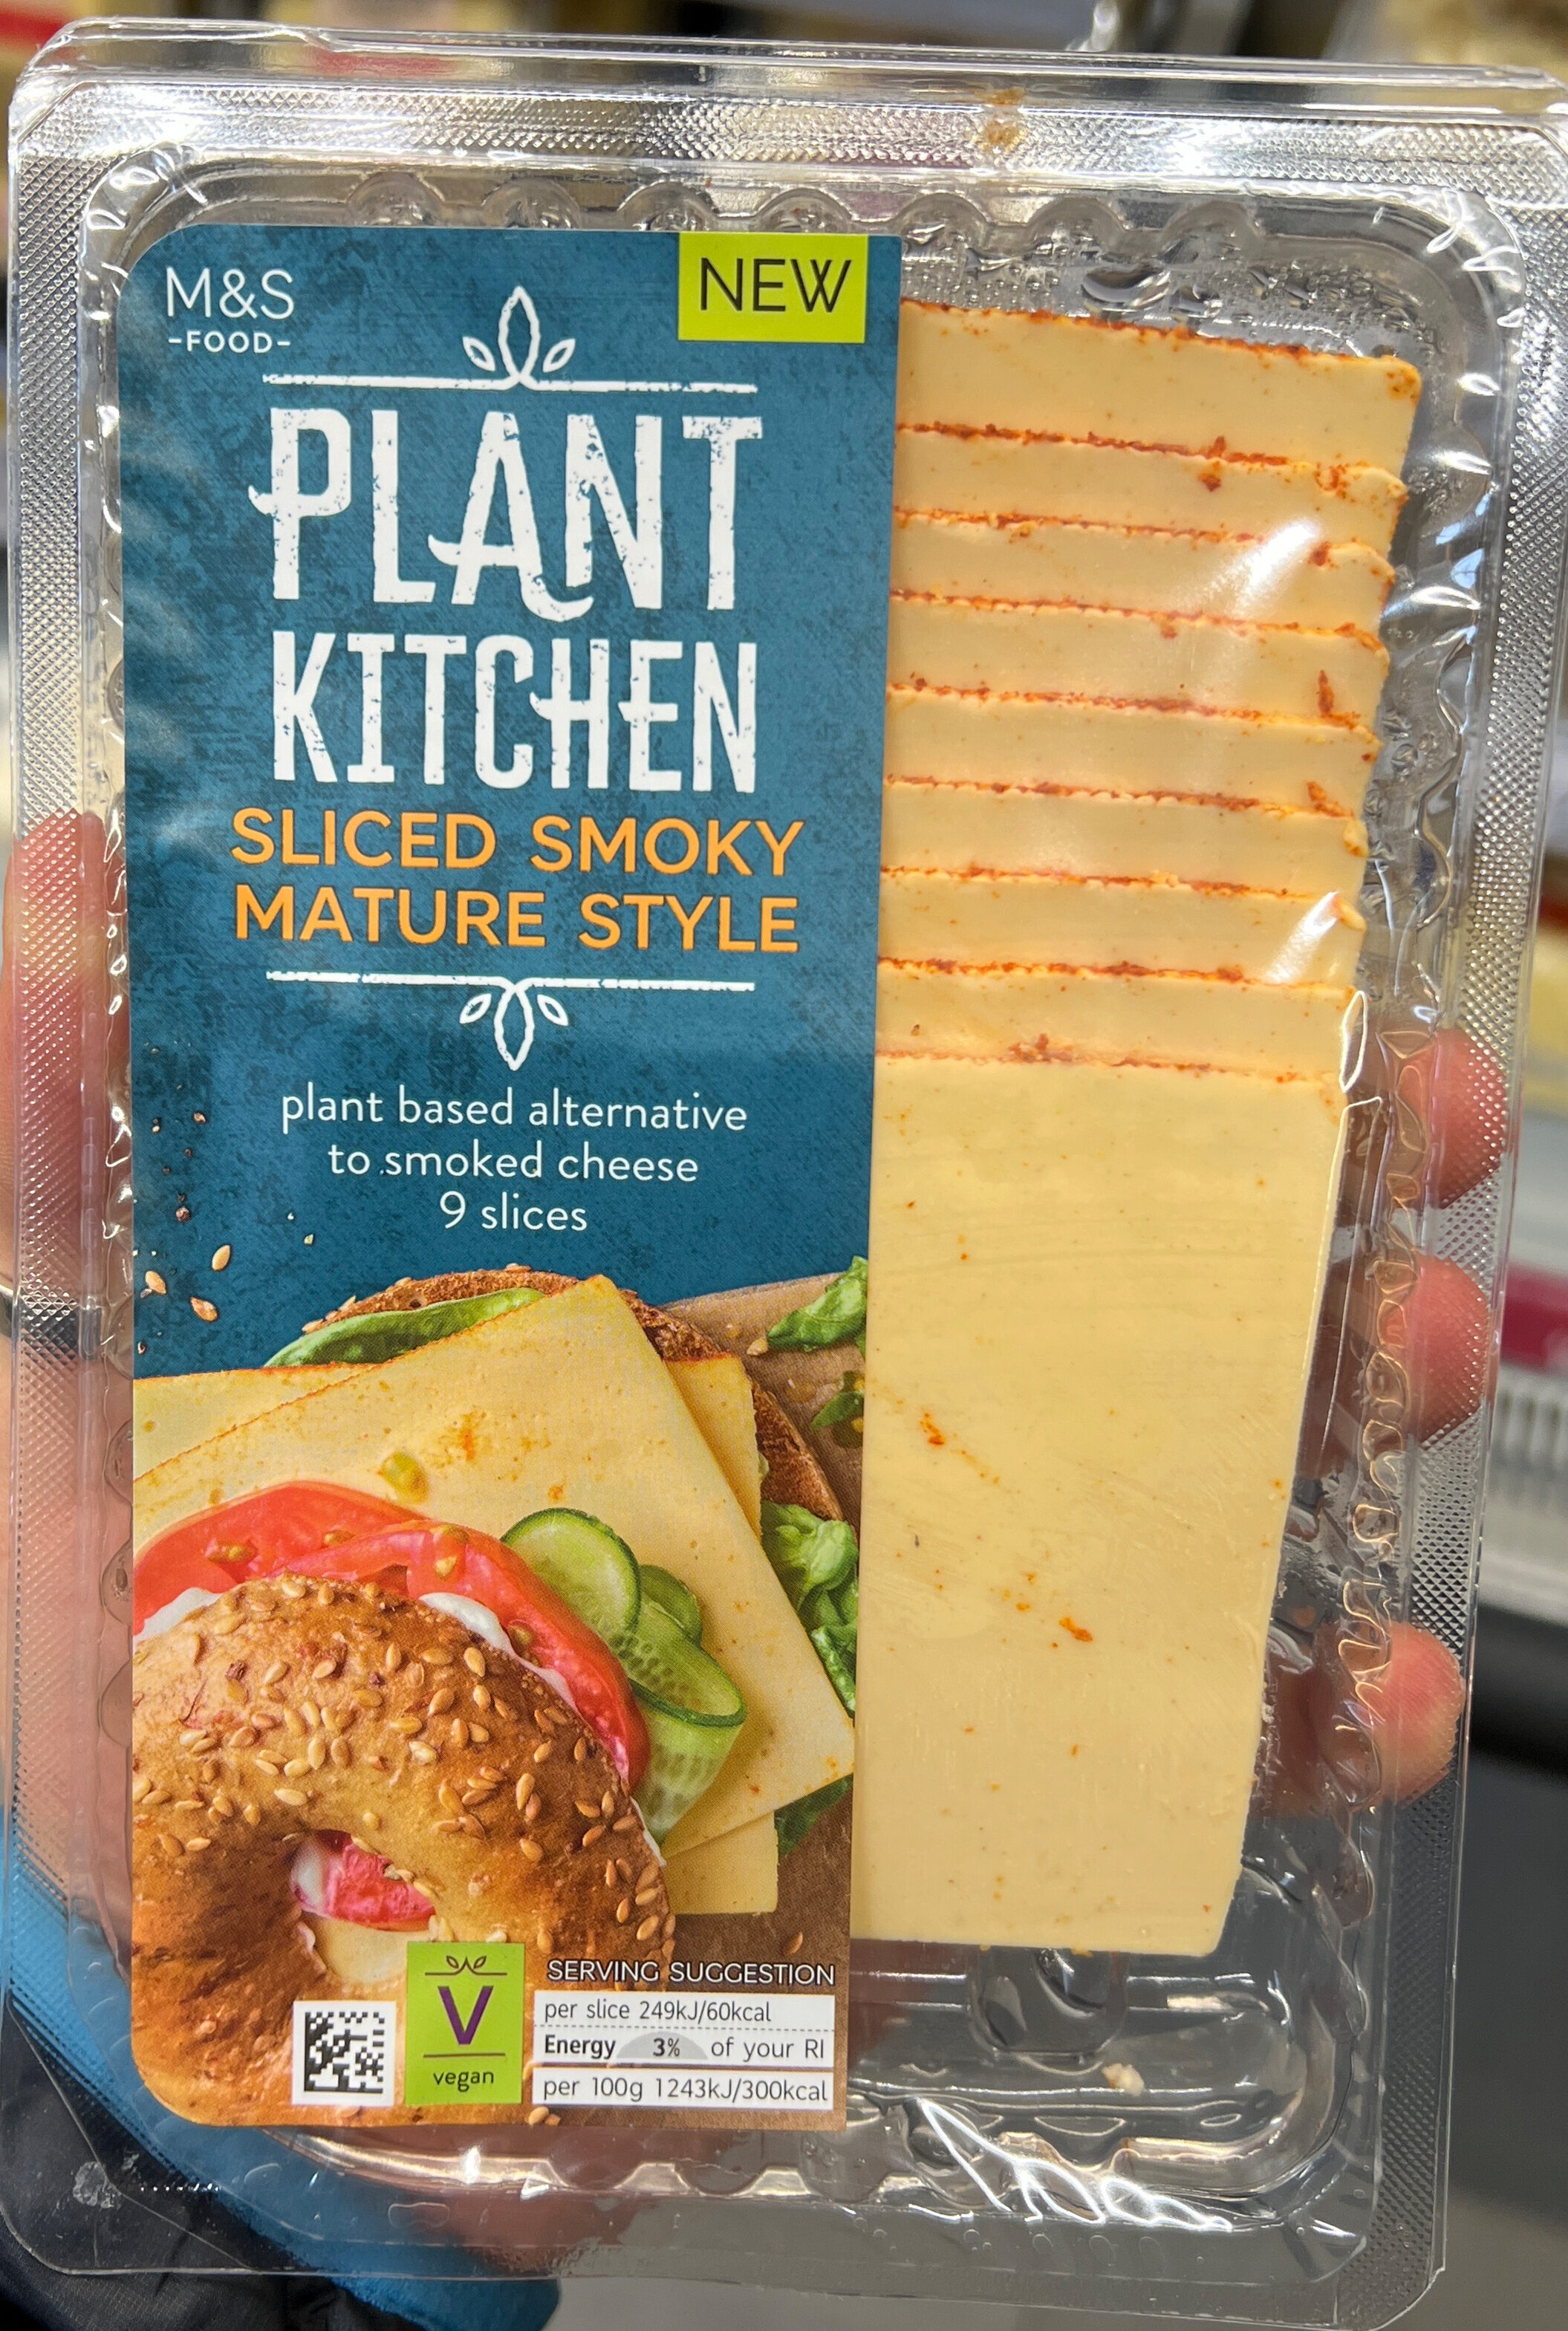 Smokey mature style plant based cheese slices - Product